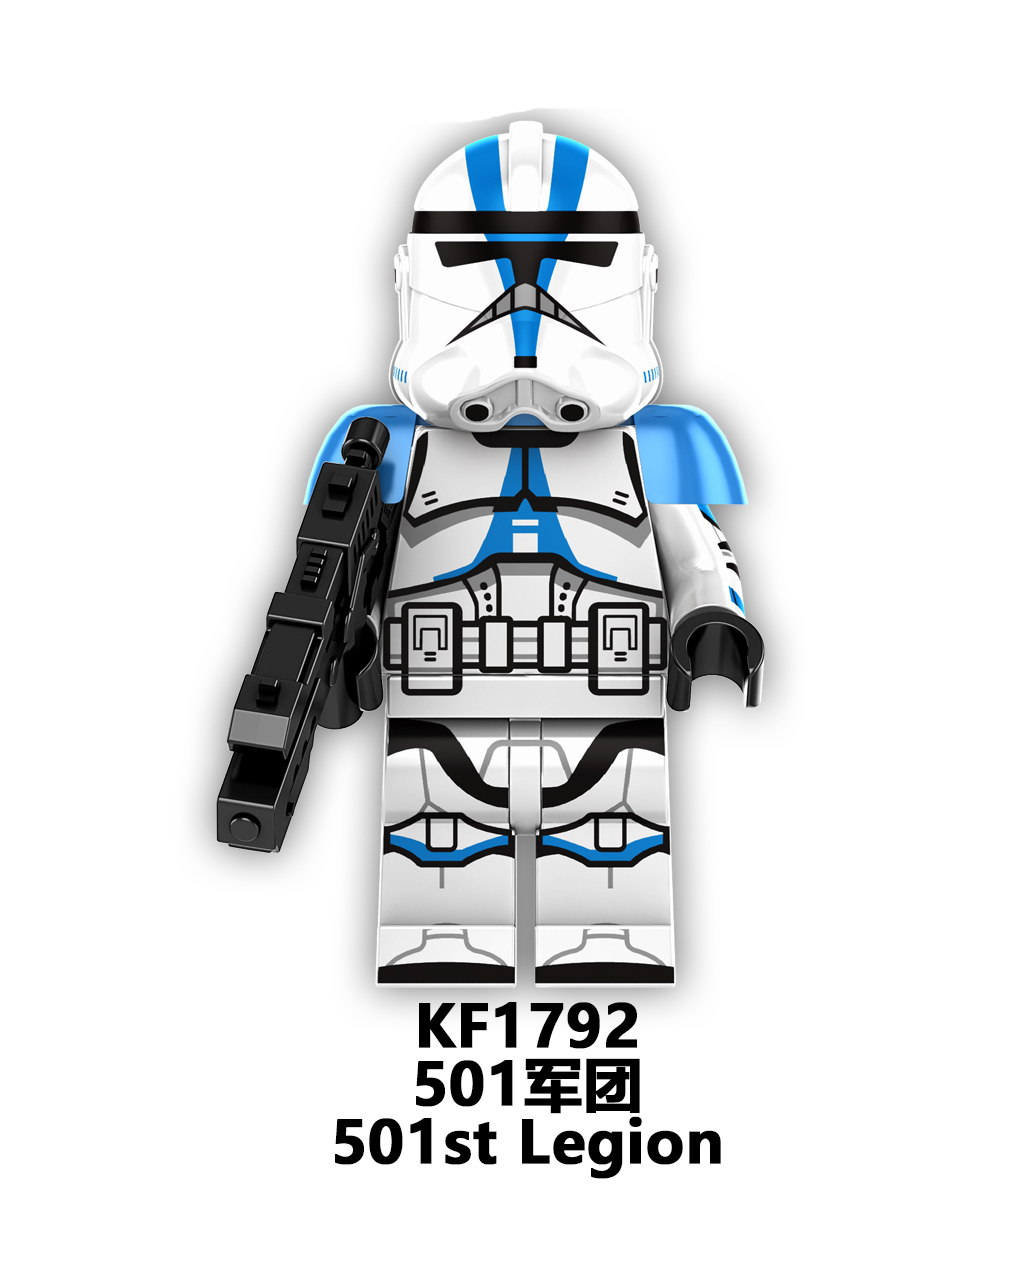 KF6170 KF1788 KF1789 KF1790 KF1791 KF1792 KF1793 KF1794 KF1795 Star Wars Mini Building Blocks R2-D2 Drabatan Hot Toys Sith Soldiers Action Figures Educational Toys For Kids Gifts 